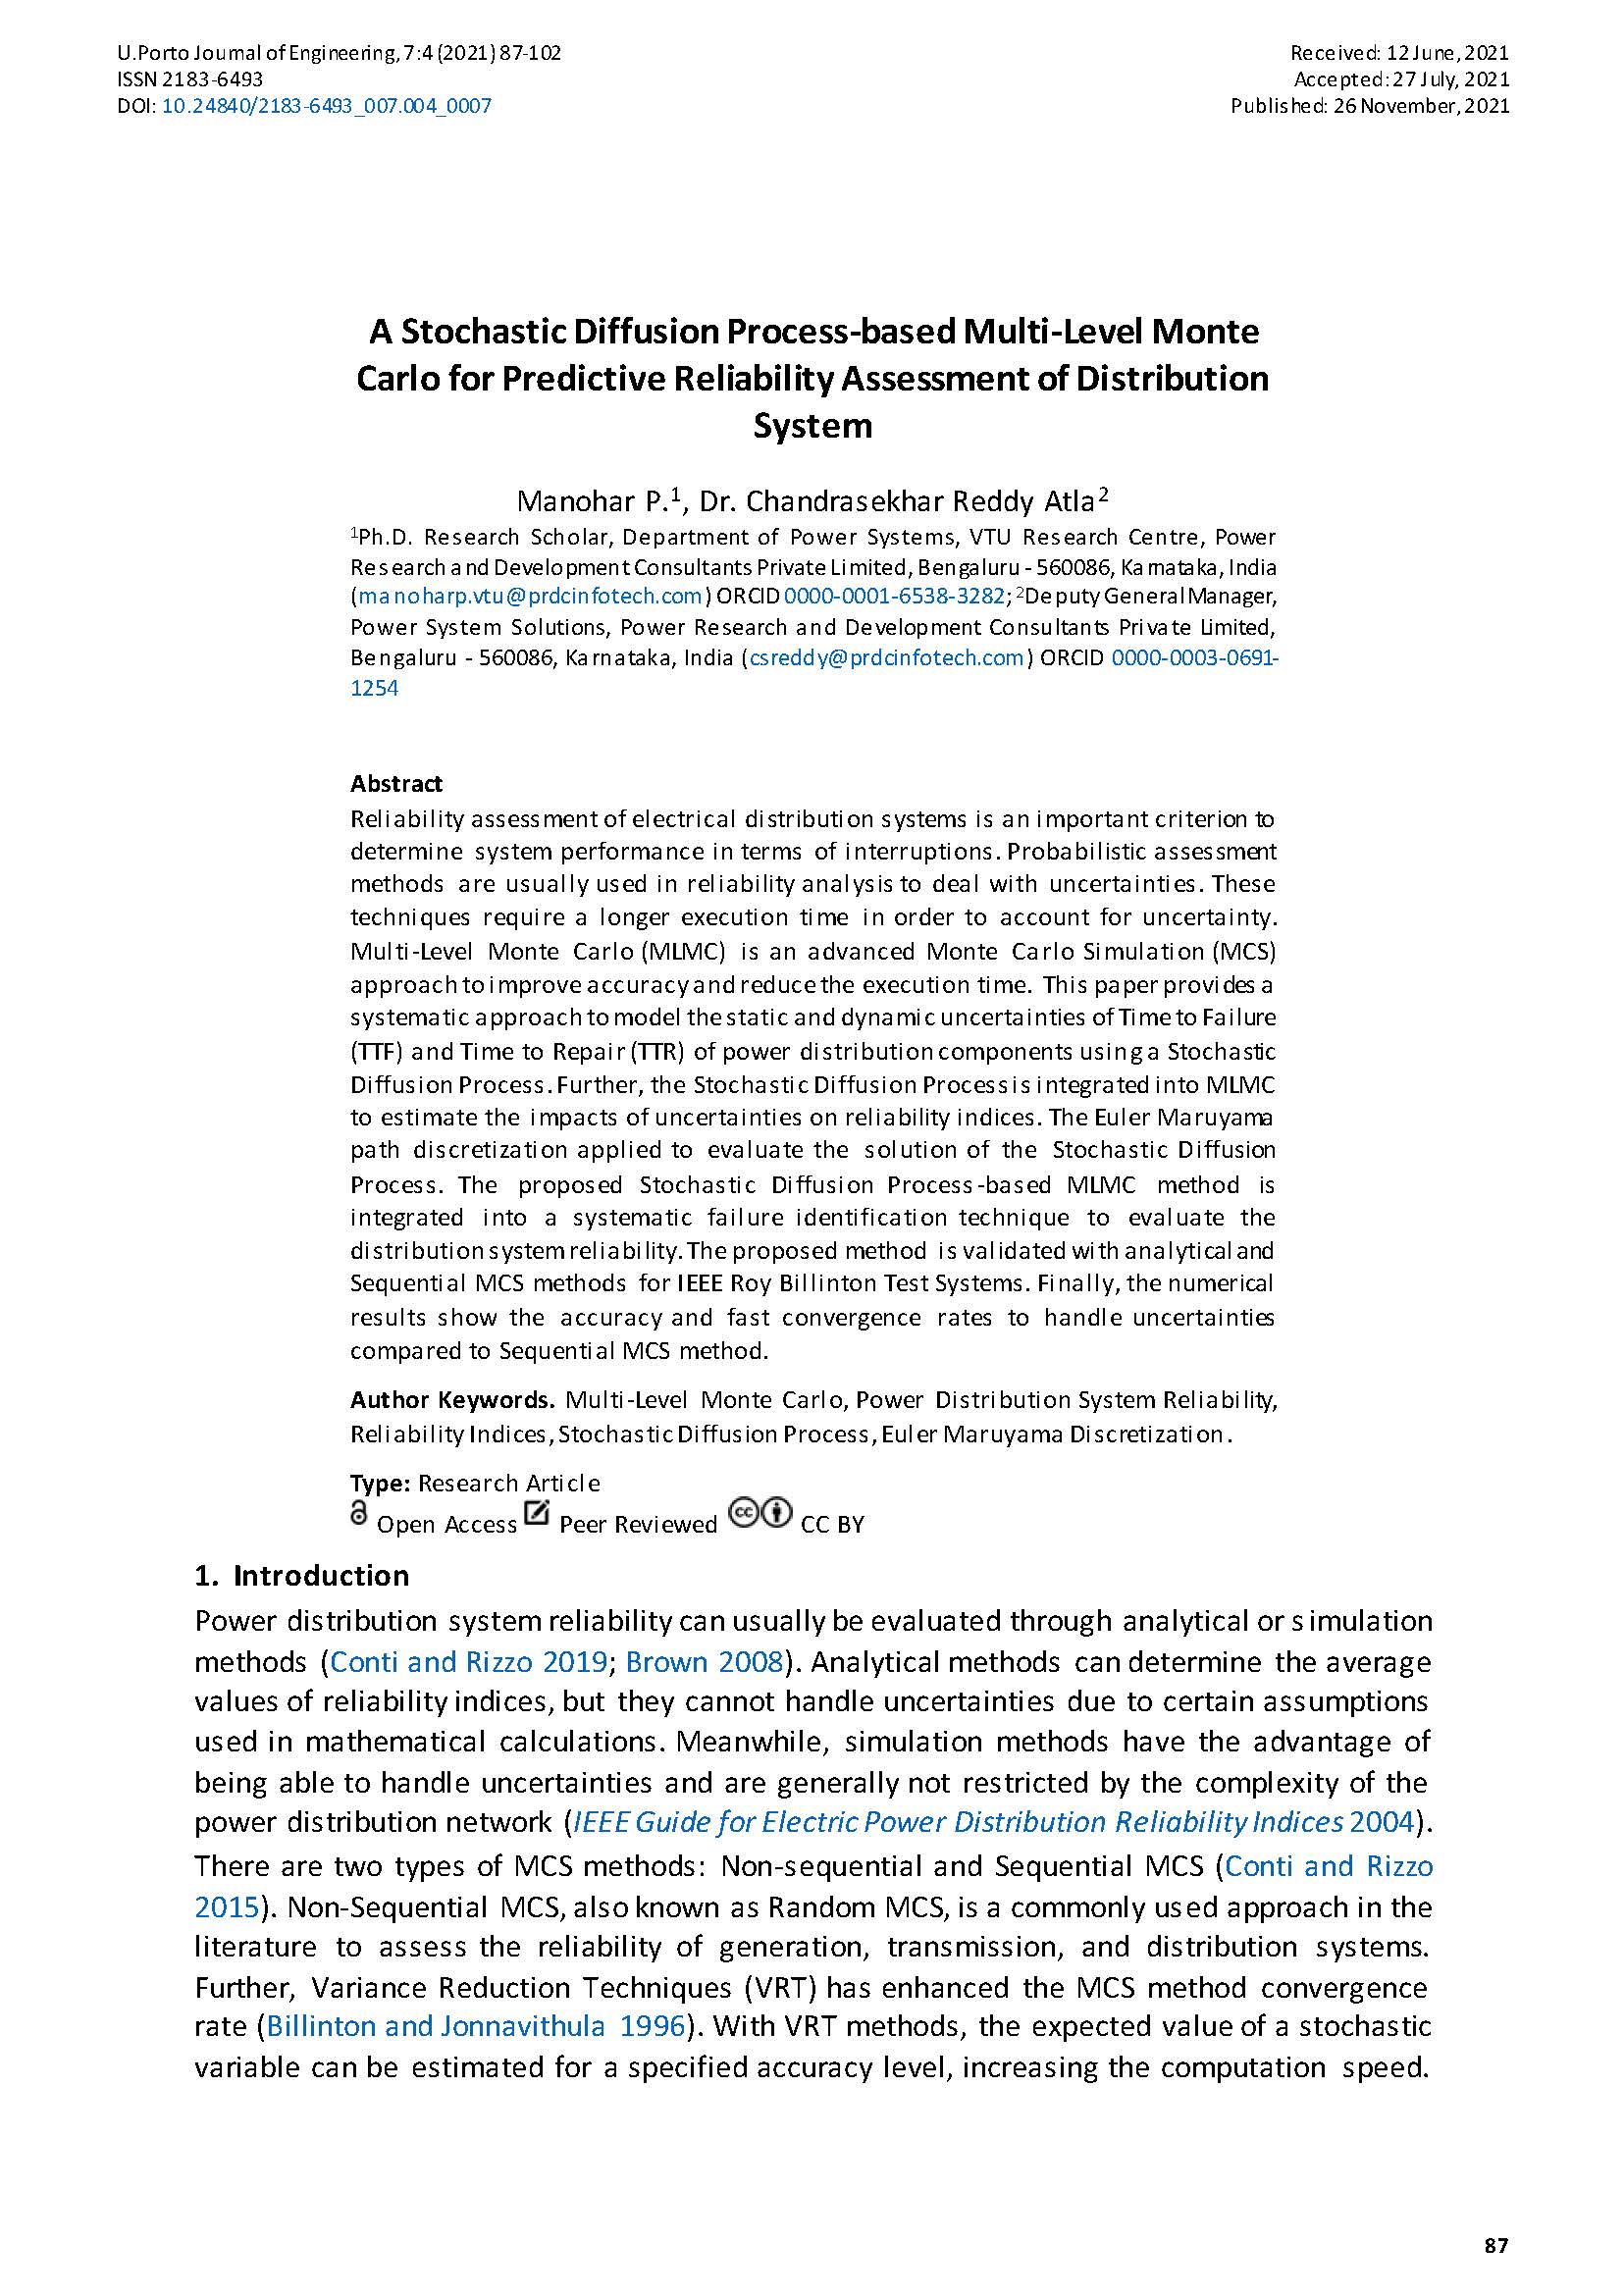 Stochastic Diffusion Process-based Multi-Level Monte Carlo for Predictive Reliability Assessment of Distribution System